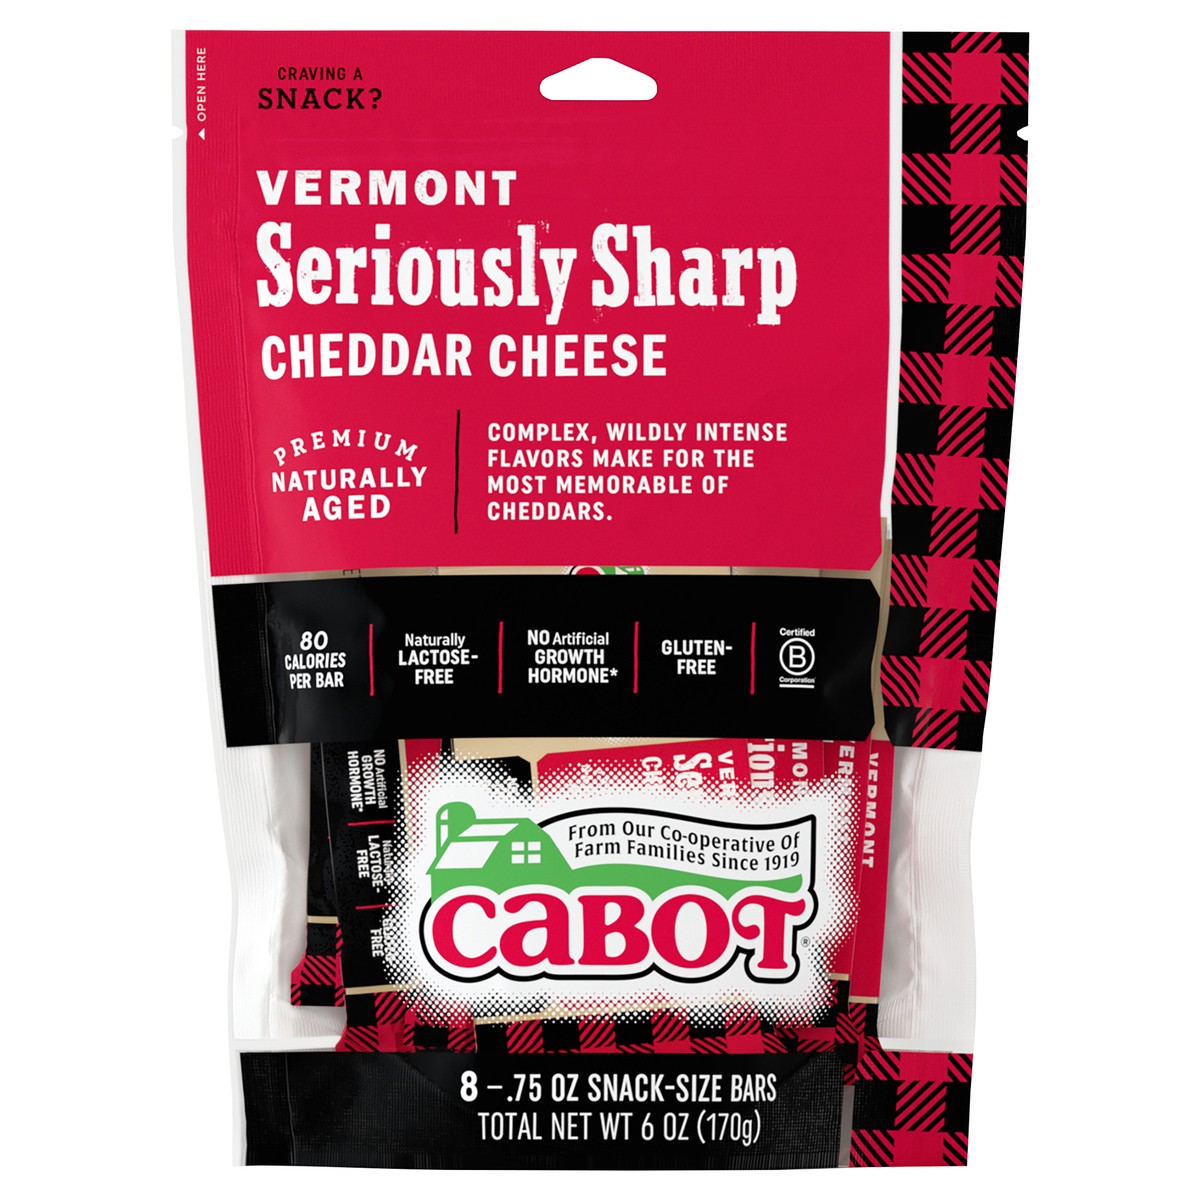 slide 1 of 10, Cabot Vermont Seriously Sharp Cheddar Cheese 8-0.75 oz Packs, 8 ct